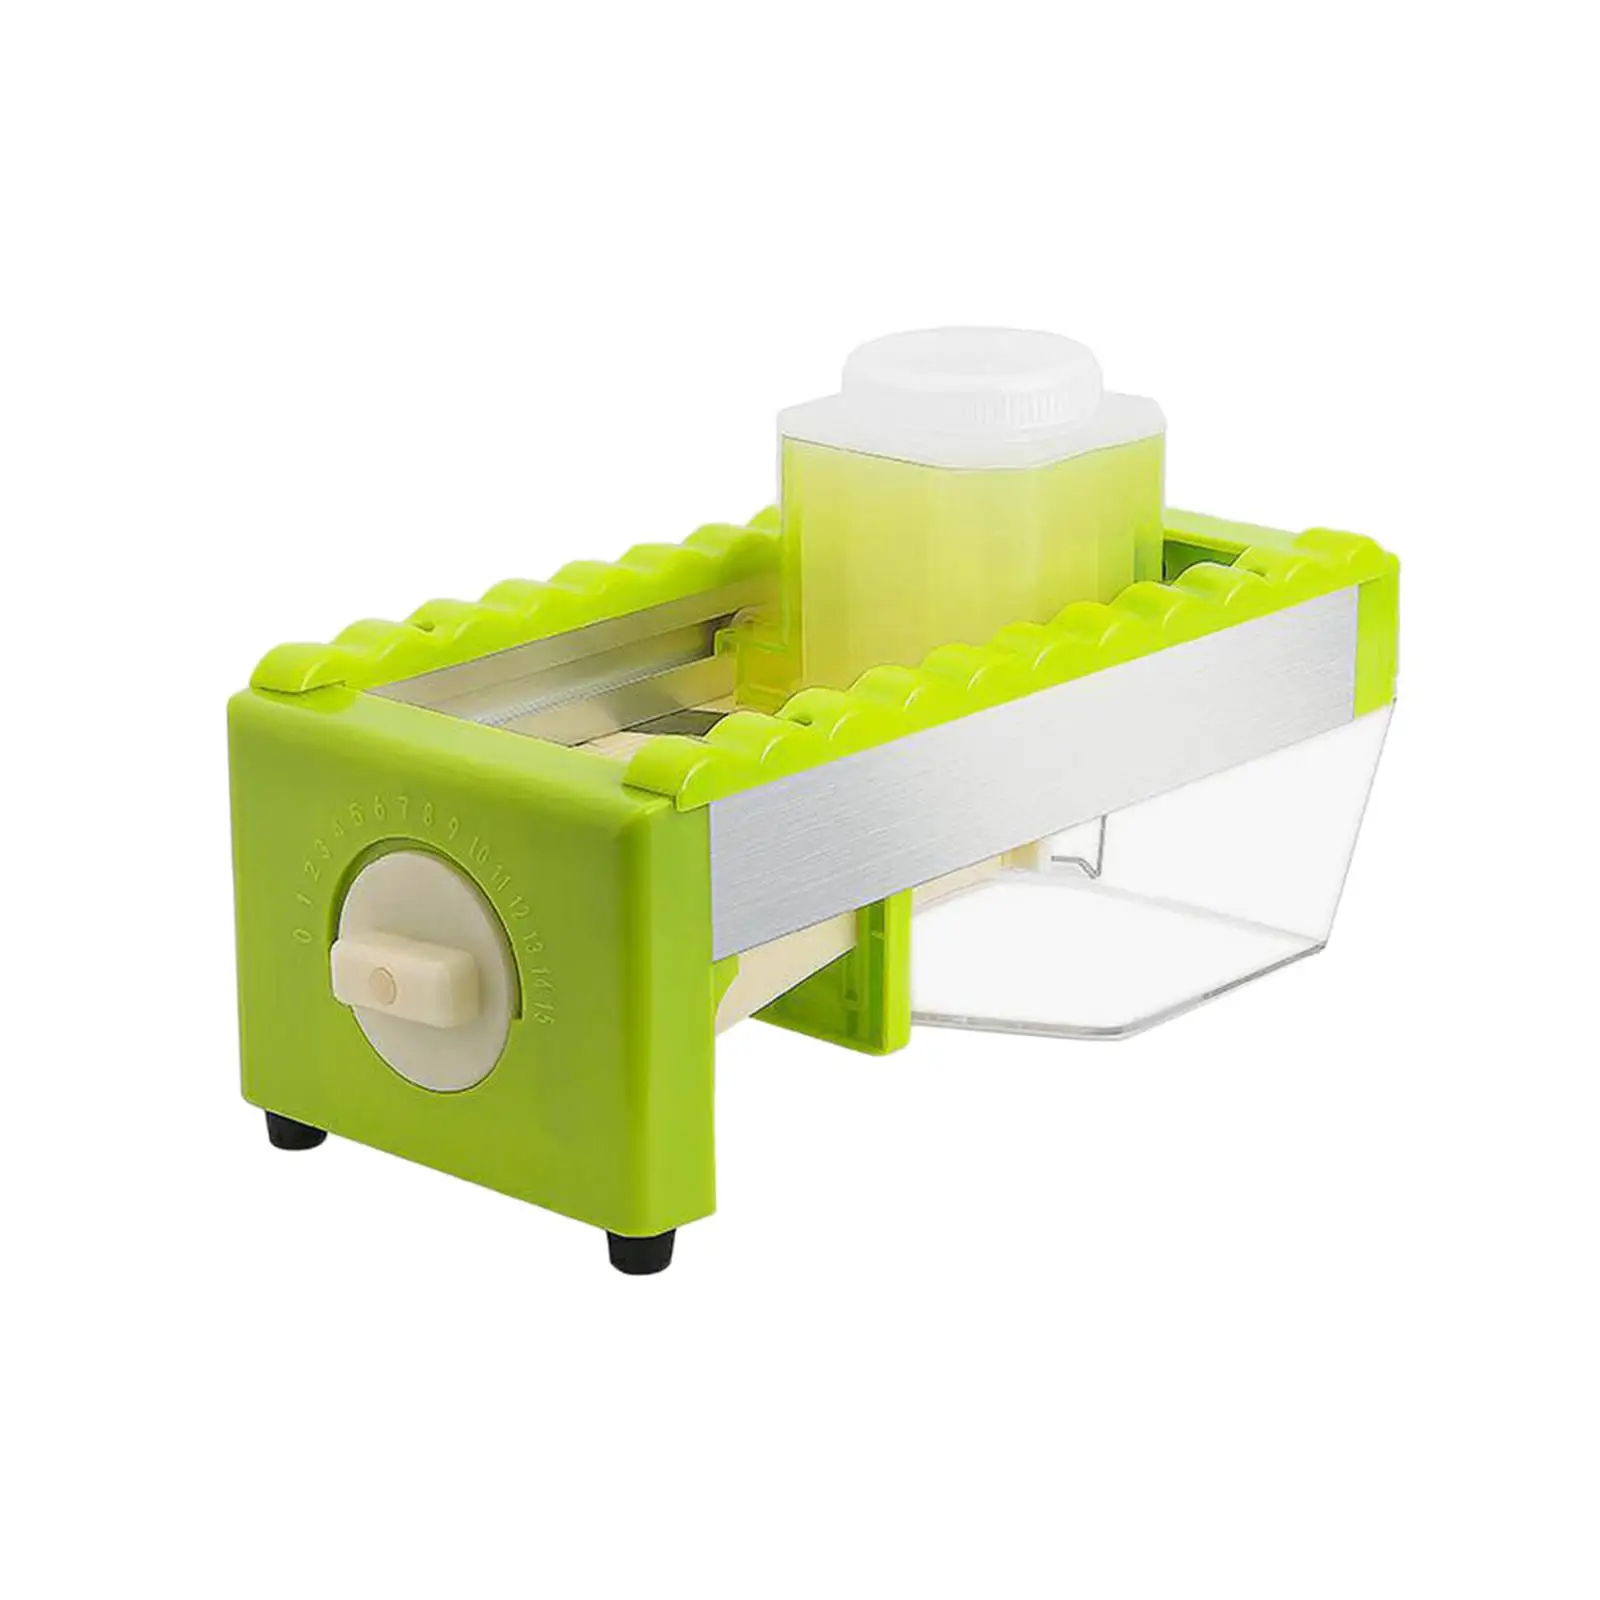 Manual Food Slicer Stable Non Slip Adjustable Thickness for Daily Household